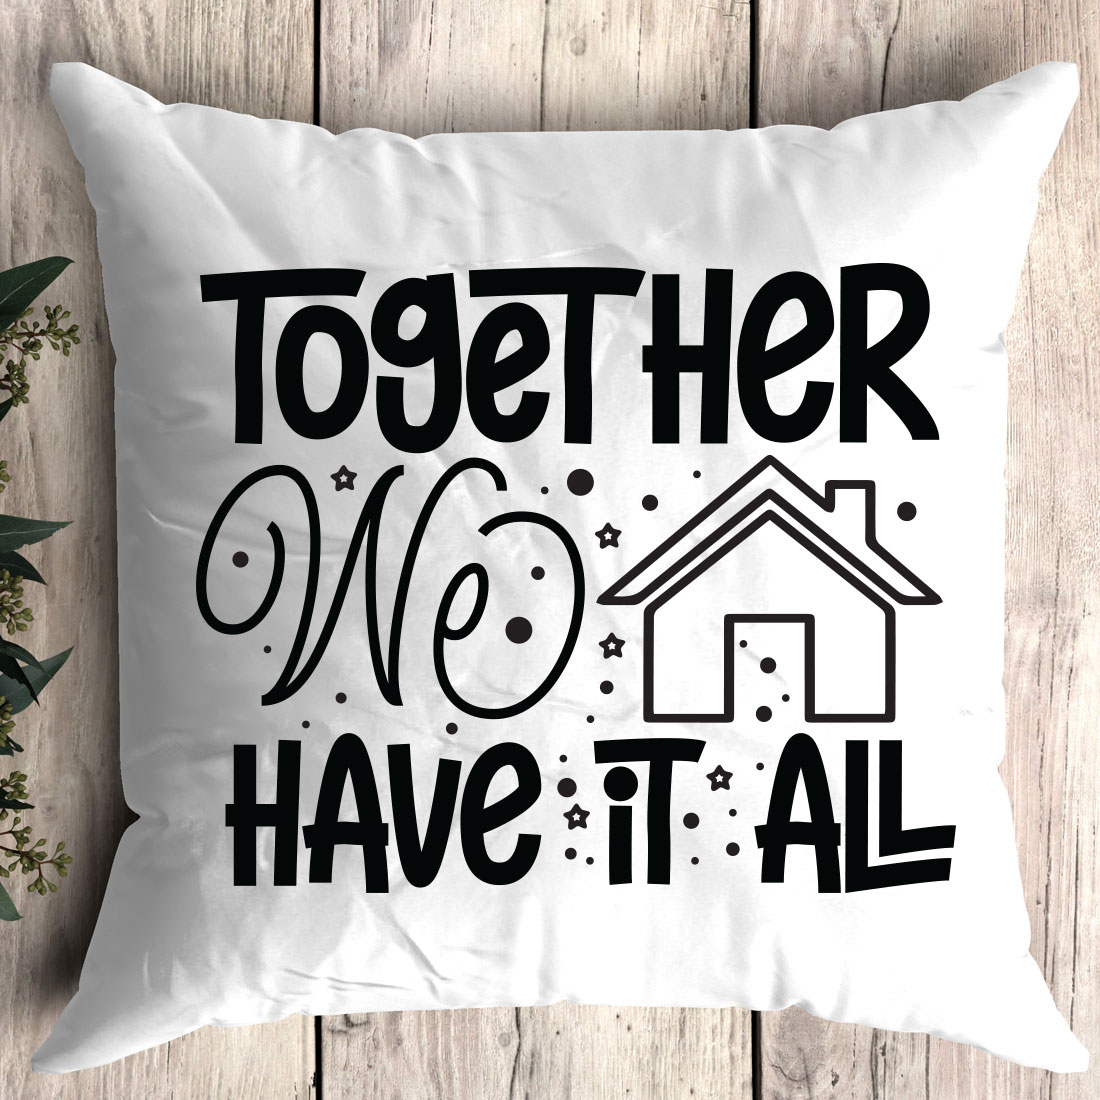 Pillow that says together we have it all.